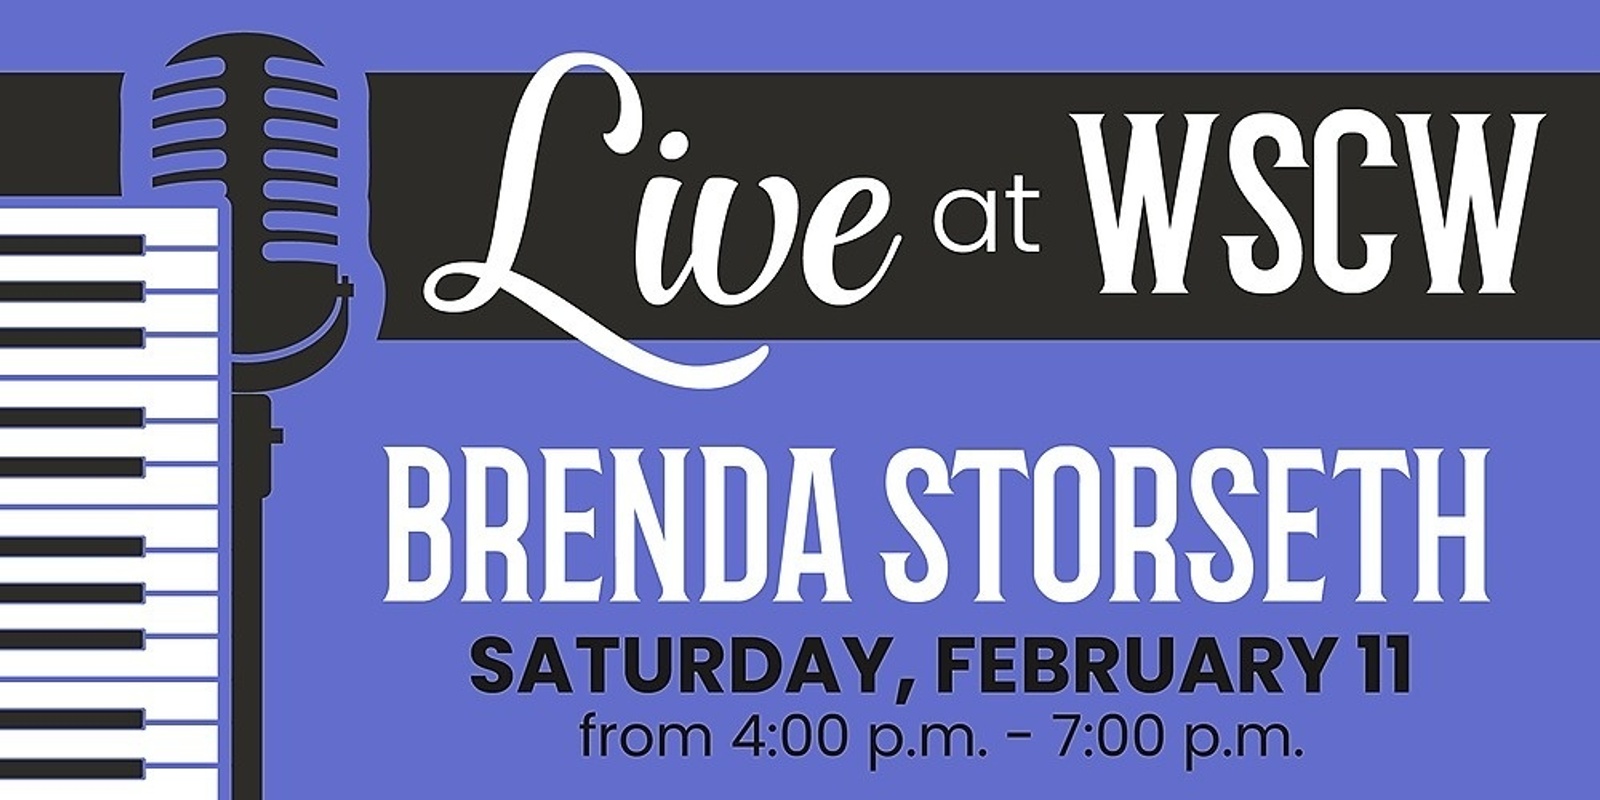 Banner image for Brenda Storseth Live at WSCW February 11